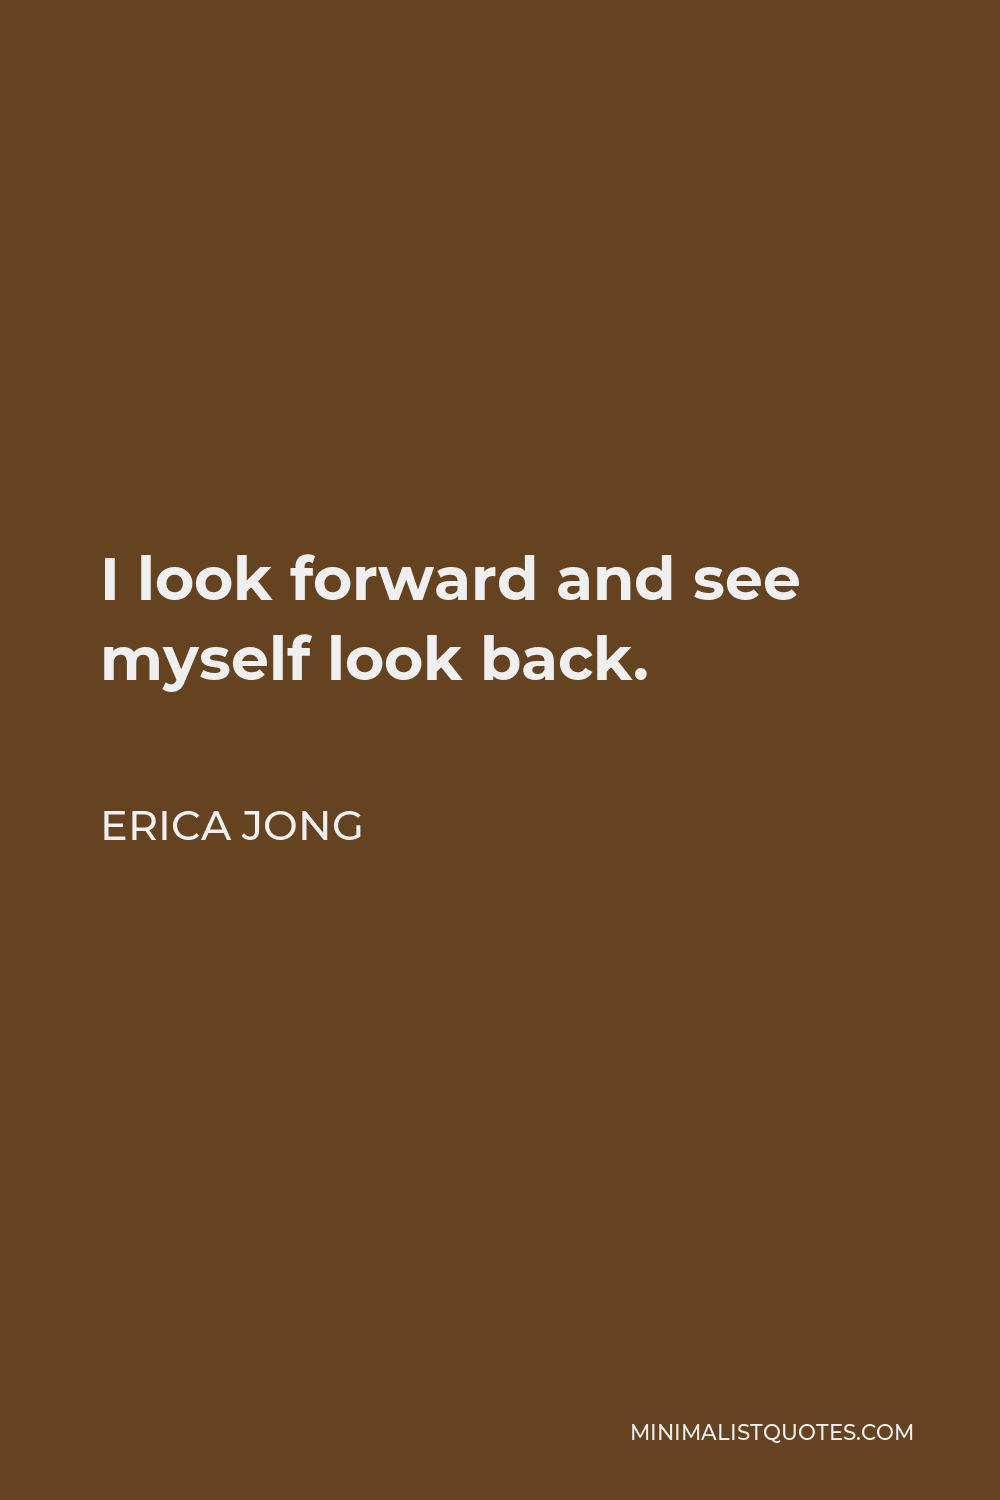 Erica Jong Quote - I look forward and see myself look back.